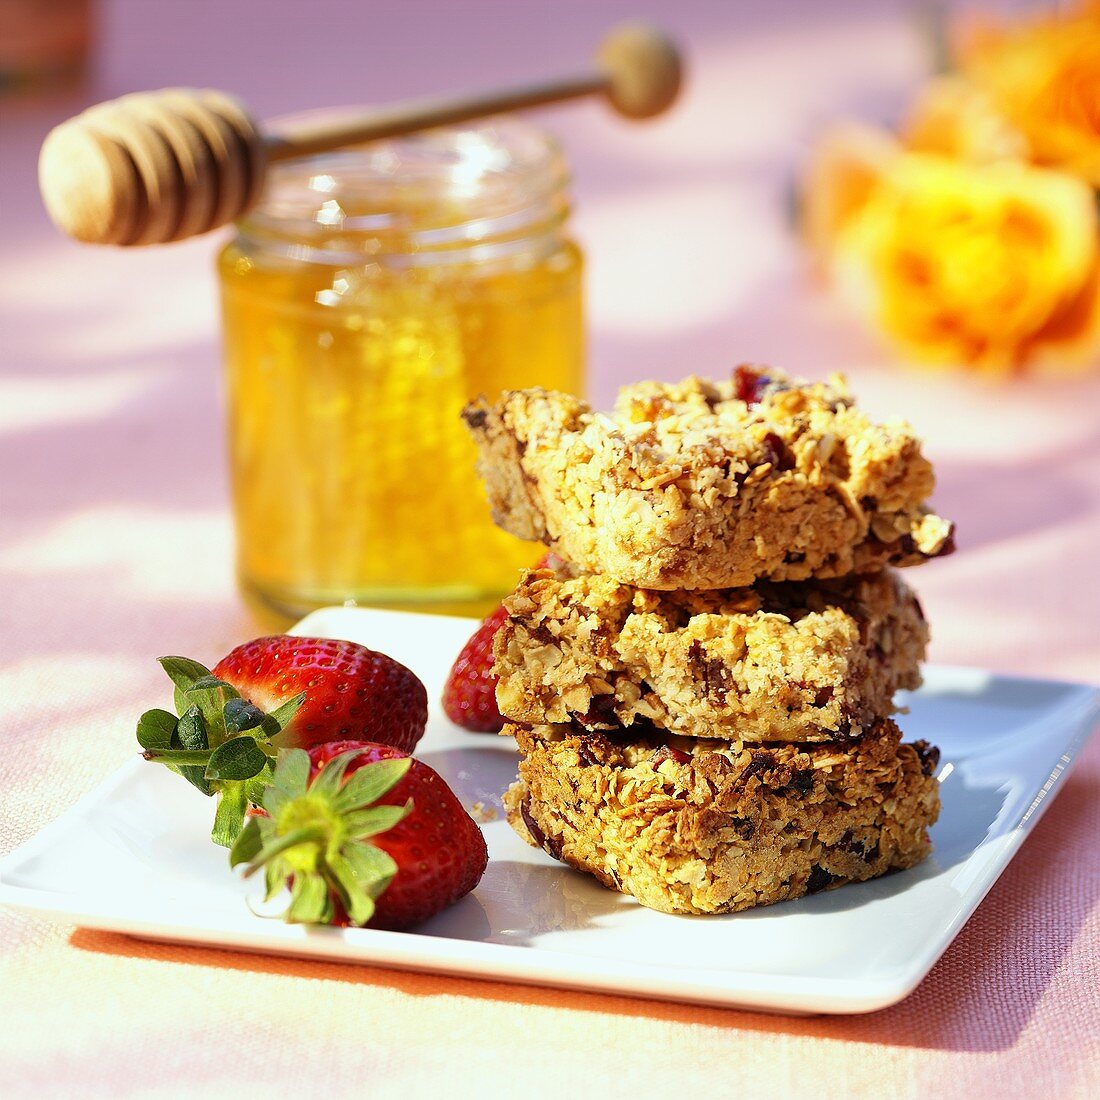 Wholemeal oat and nut biscuits with honey